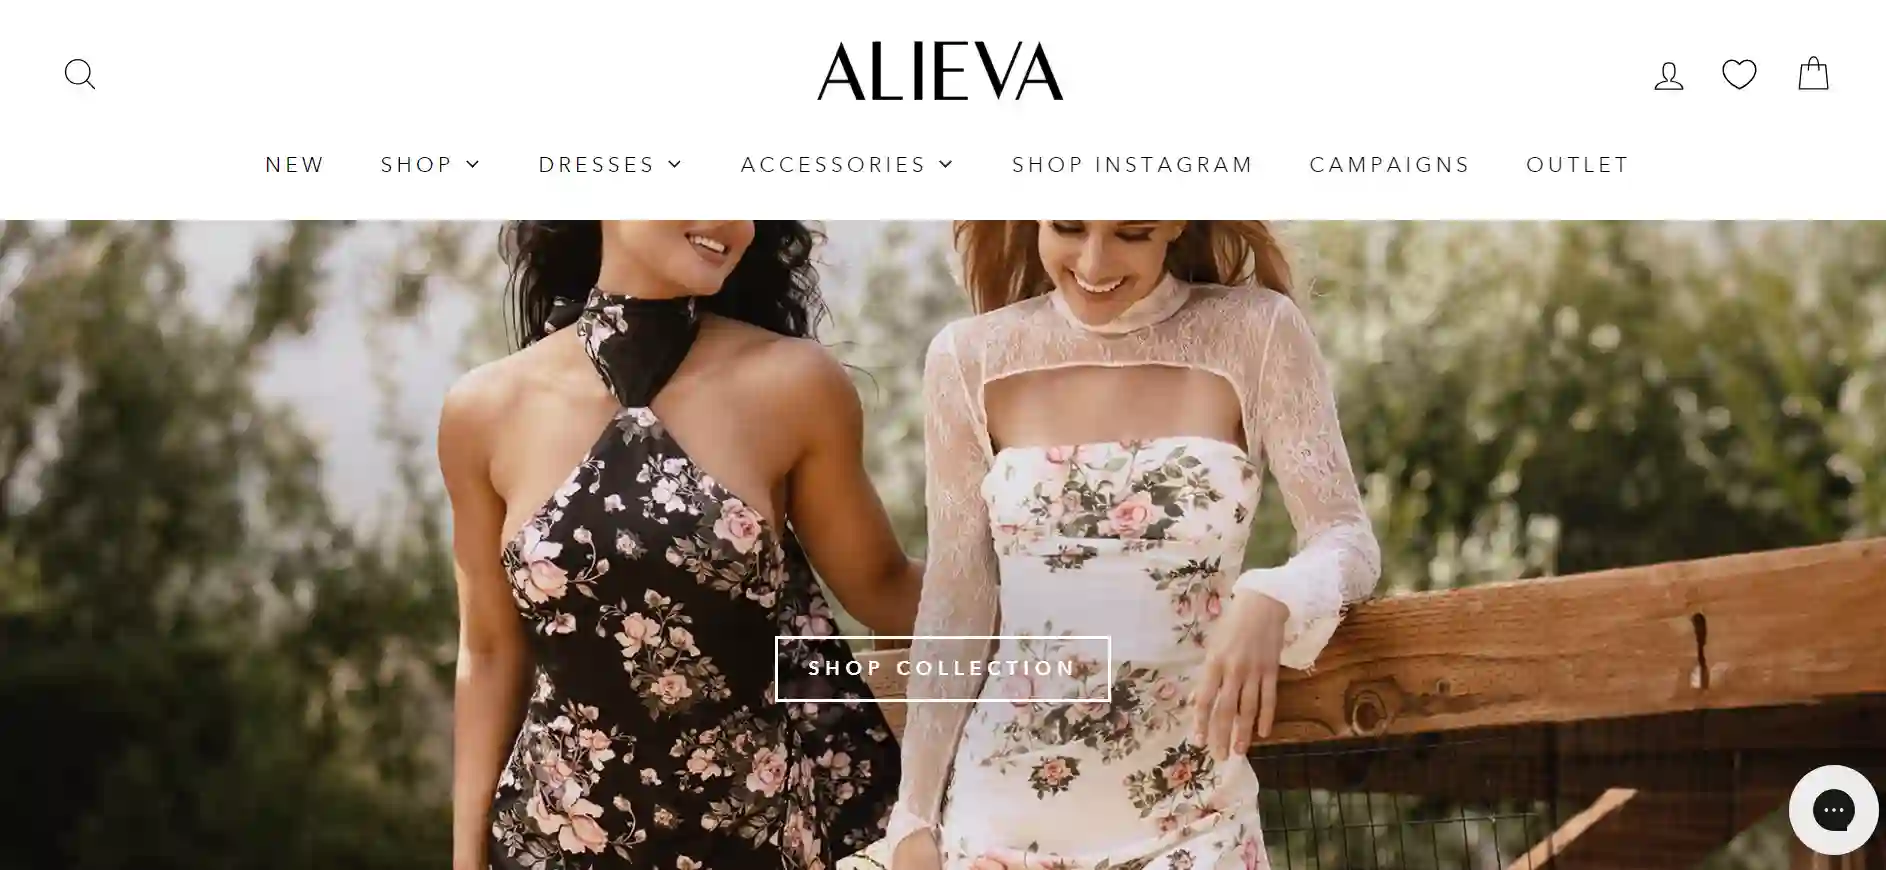 You are currently viewing Alieva Clothing Reviews – Is It Worth Trying?